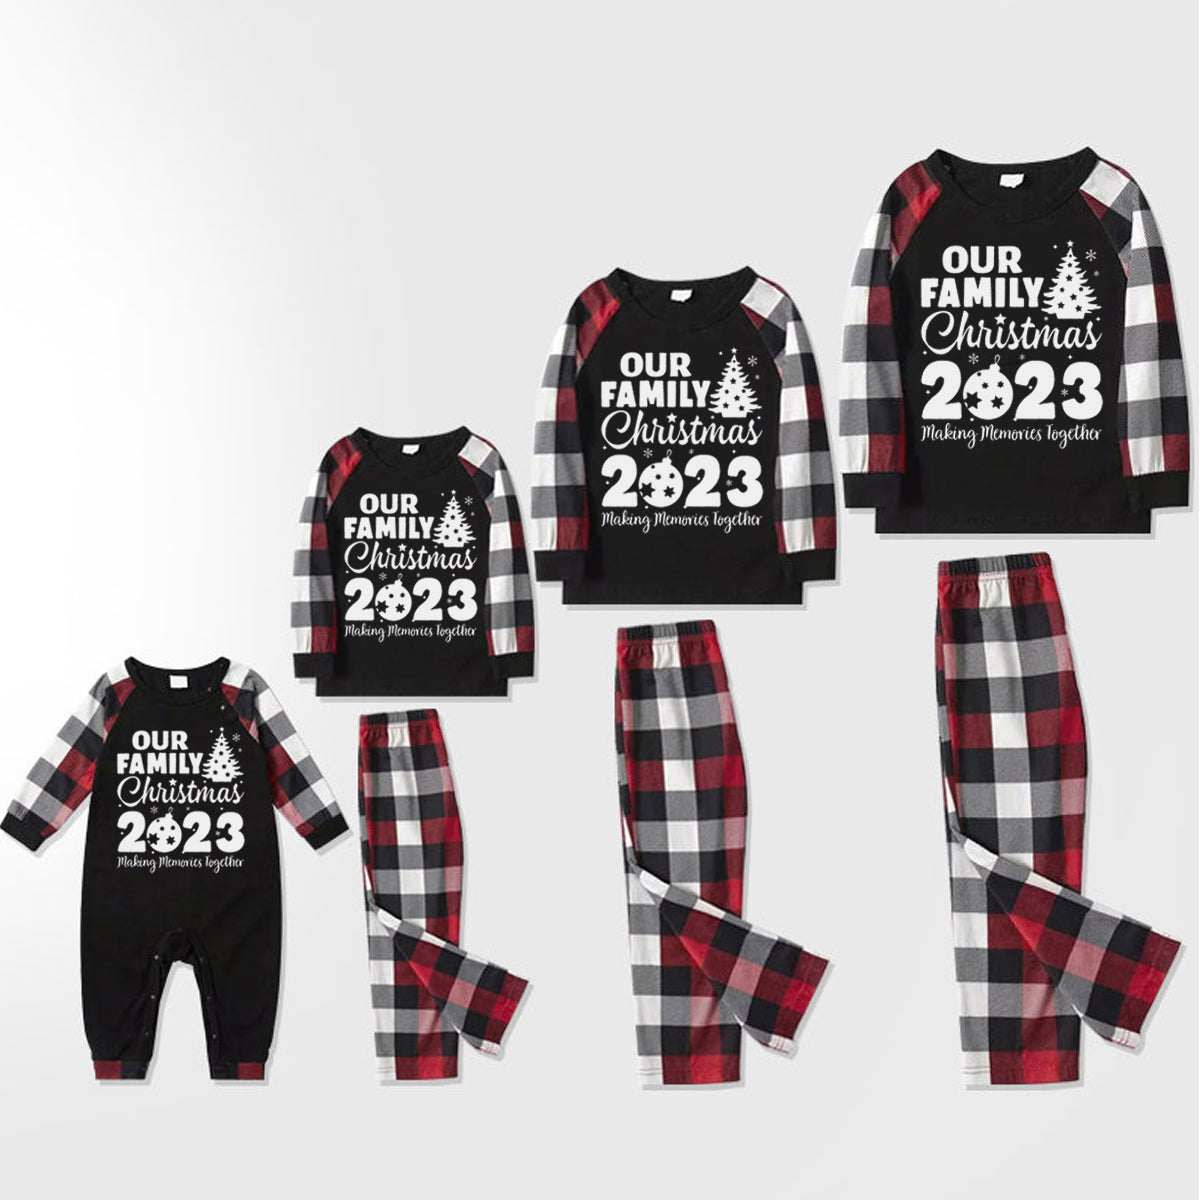 Christmas ‘ Family Christmas 2023’ Letter Print Patterned Casual Long Sleeve Sweatshirts Contrast Tops and Red & Black & White Plaid Pants Family Matching Pajamas Set With Dog Bandana